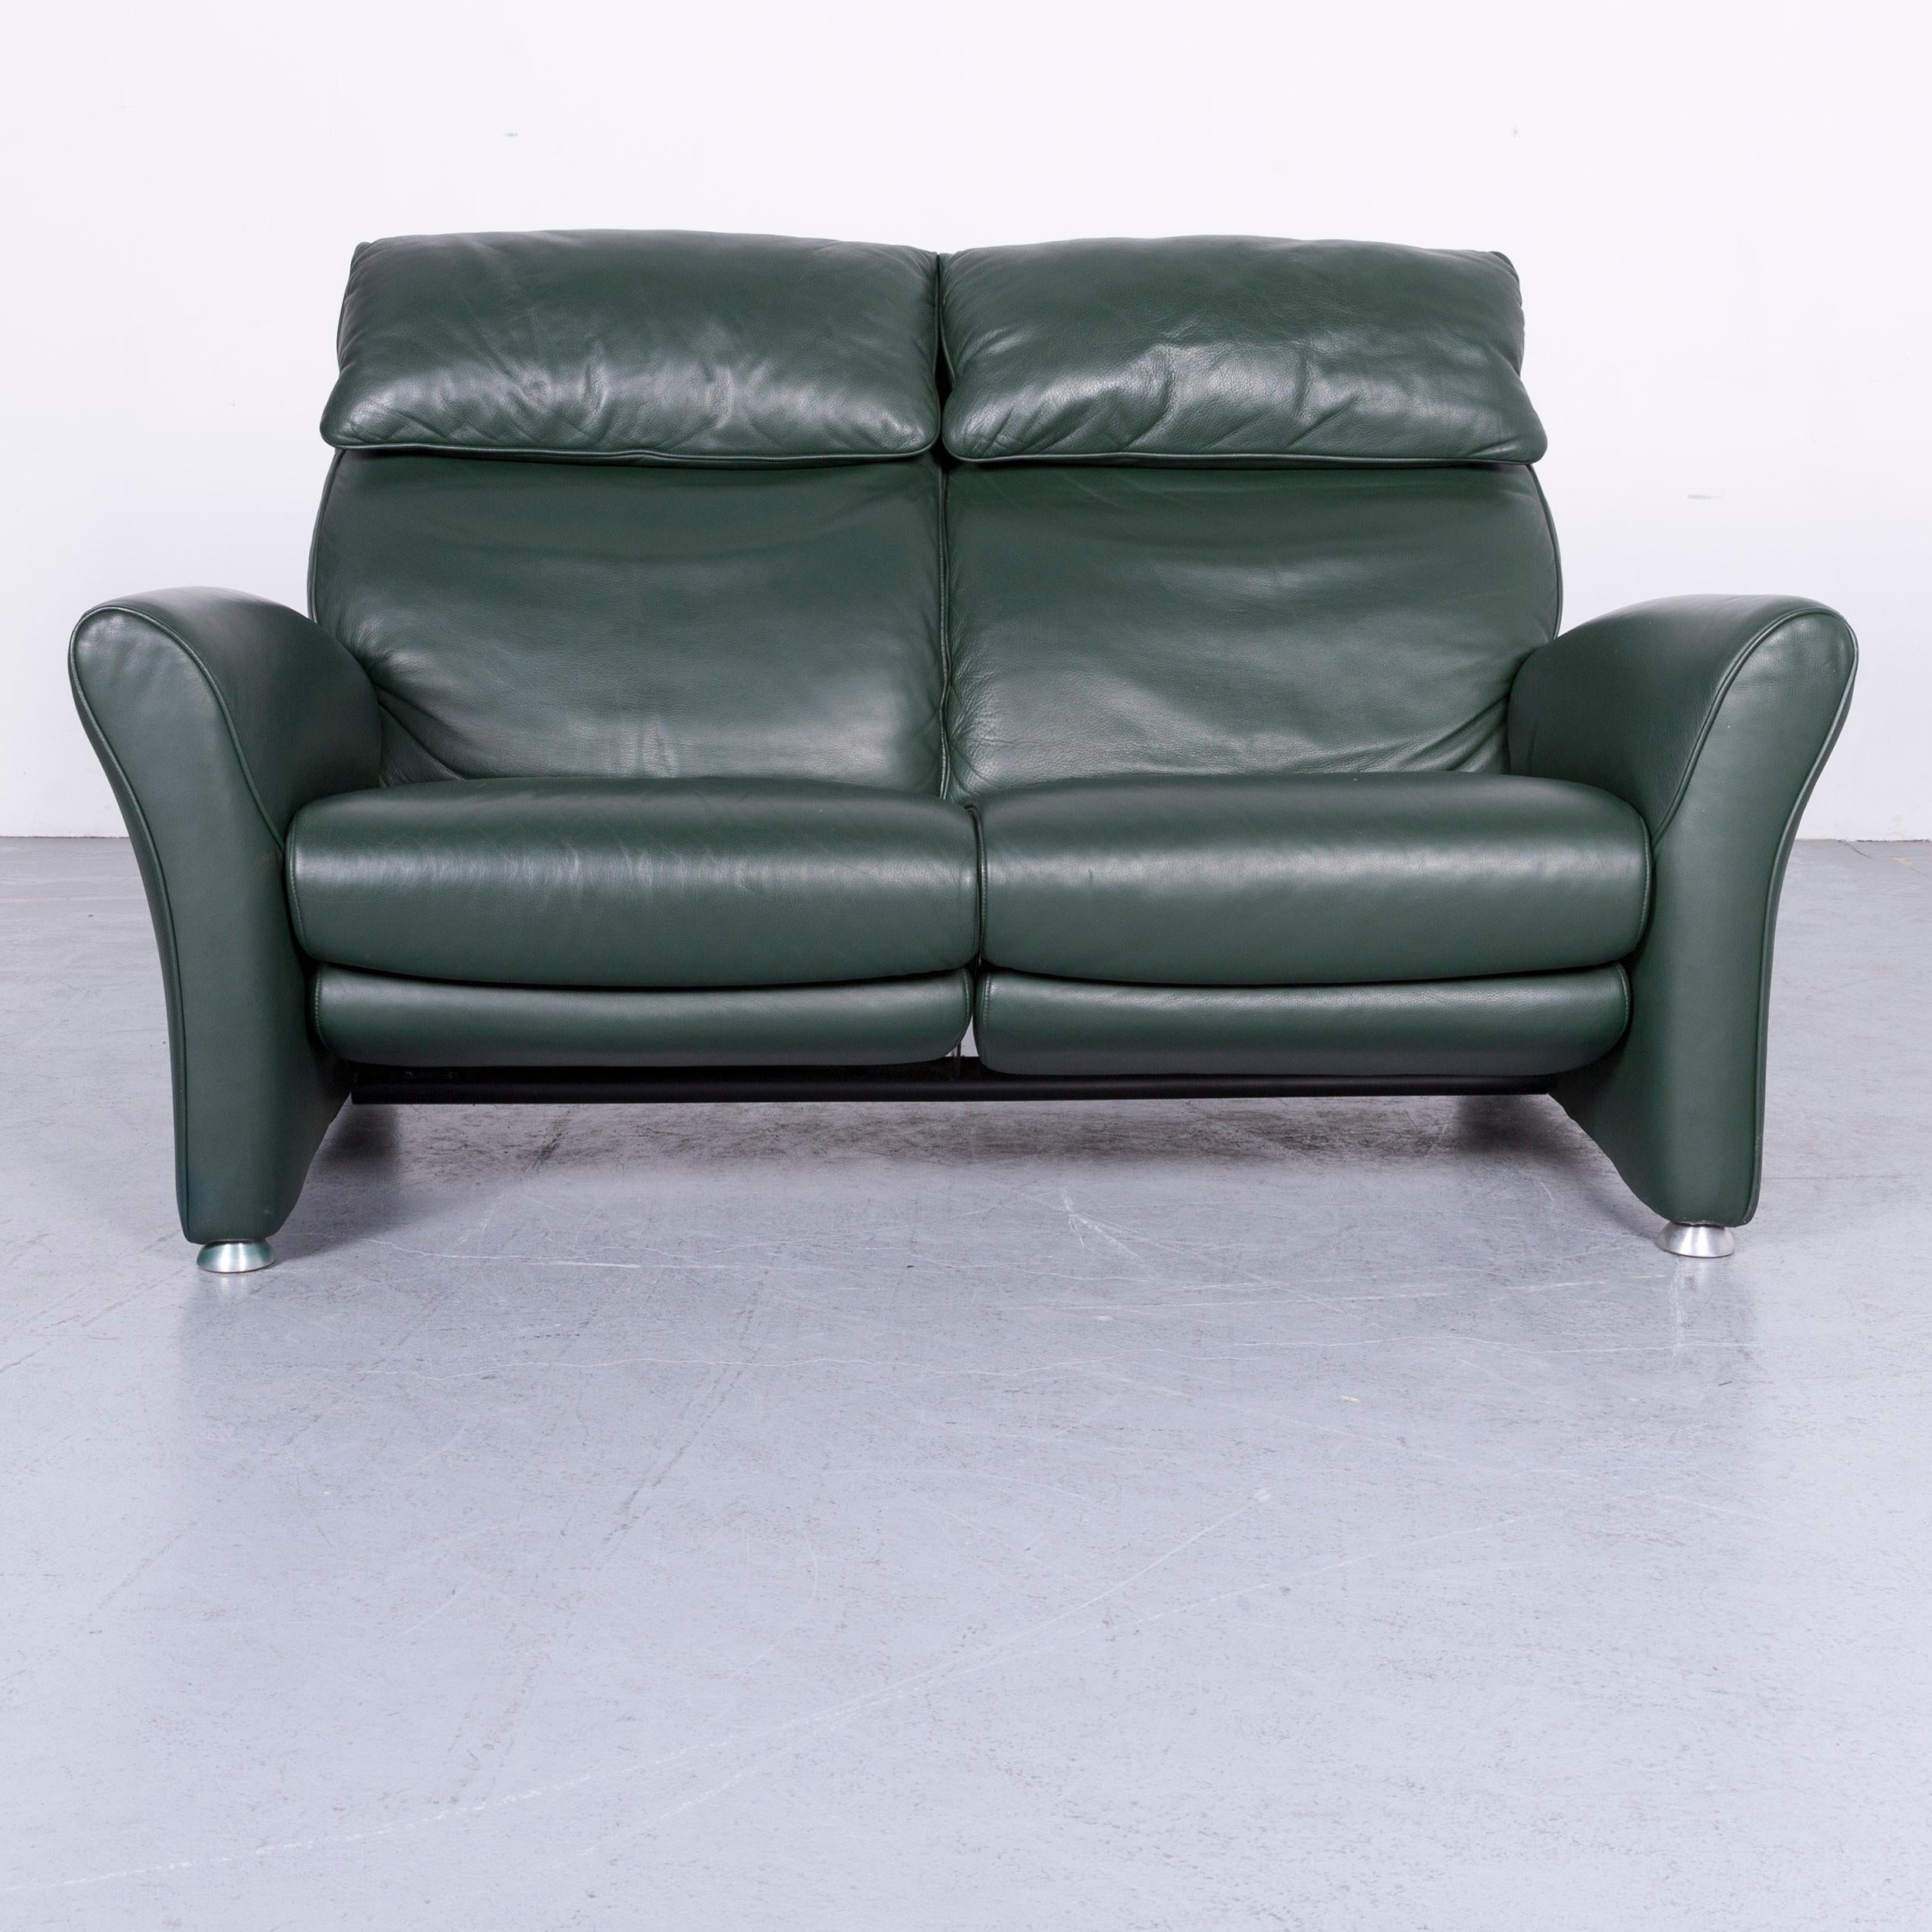 German Musterring Designer Leather Sofa Armchair Set Green Two-Seat Couch